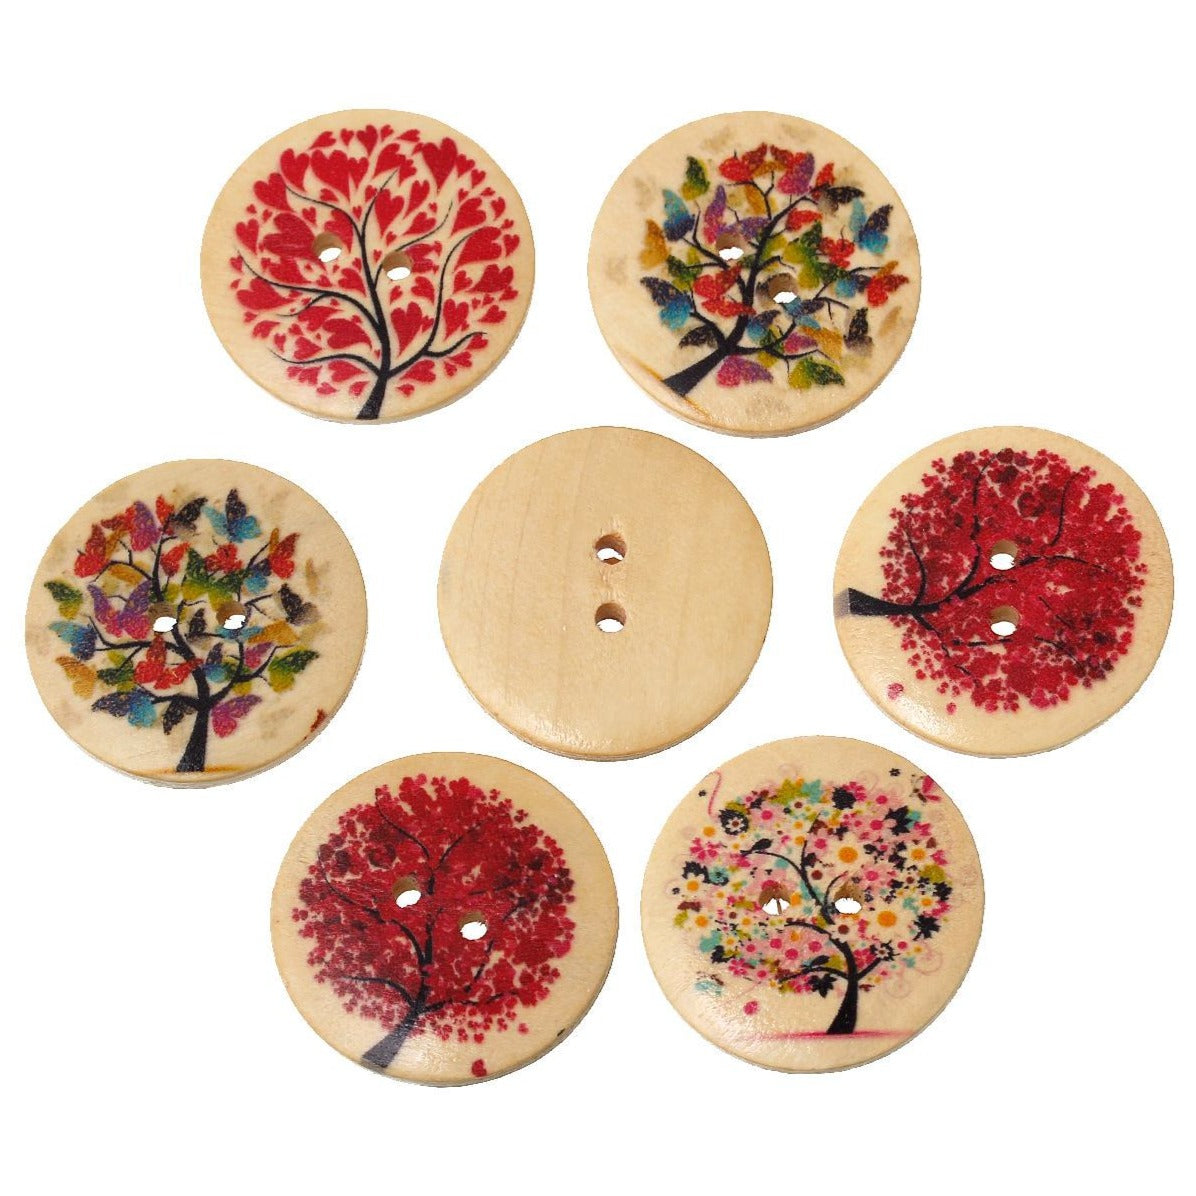 Seasons Trees wood sewing buttons - 6 Mixed Patterns craft buttons